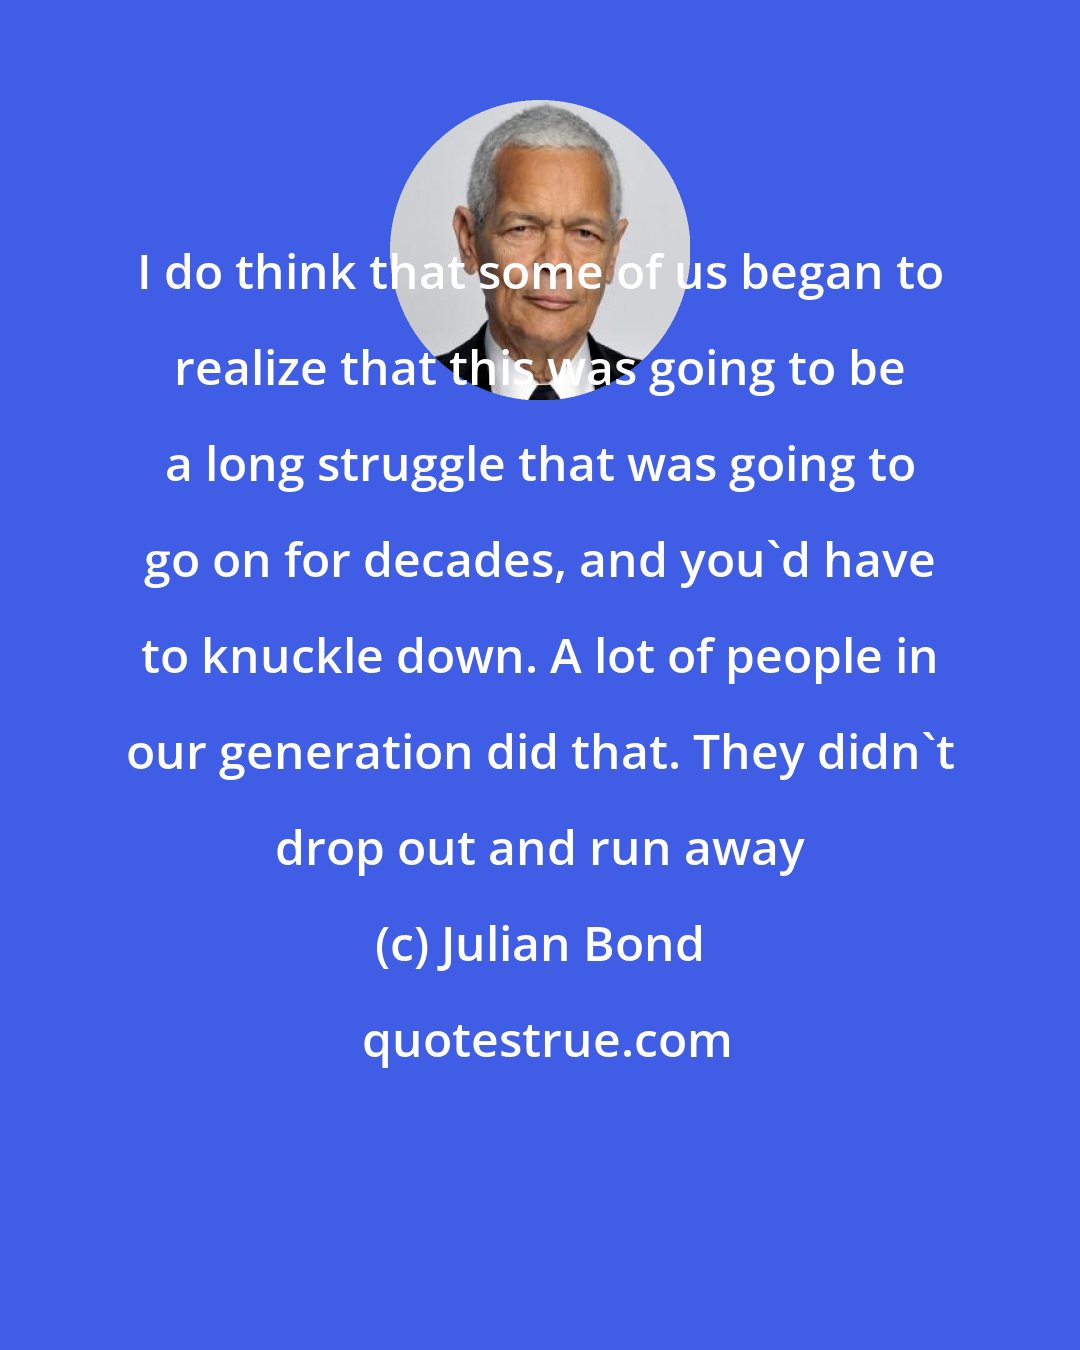 Julian Bond: I do think that some of us began to realize that this was going to be a long struggle that was going to go on for decades, and you'd have to knuckle down. A lot of people in our generation did that. They didn't drop out and run away